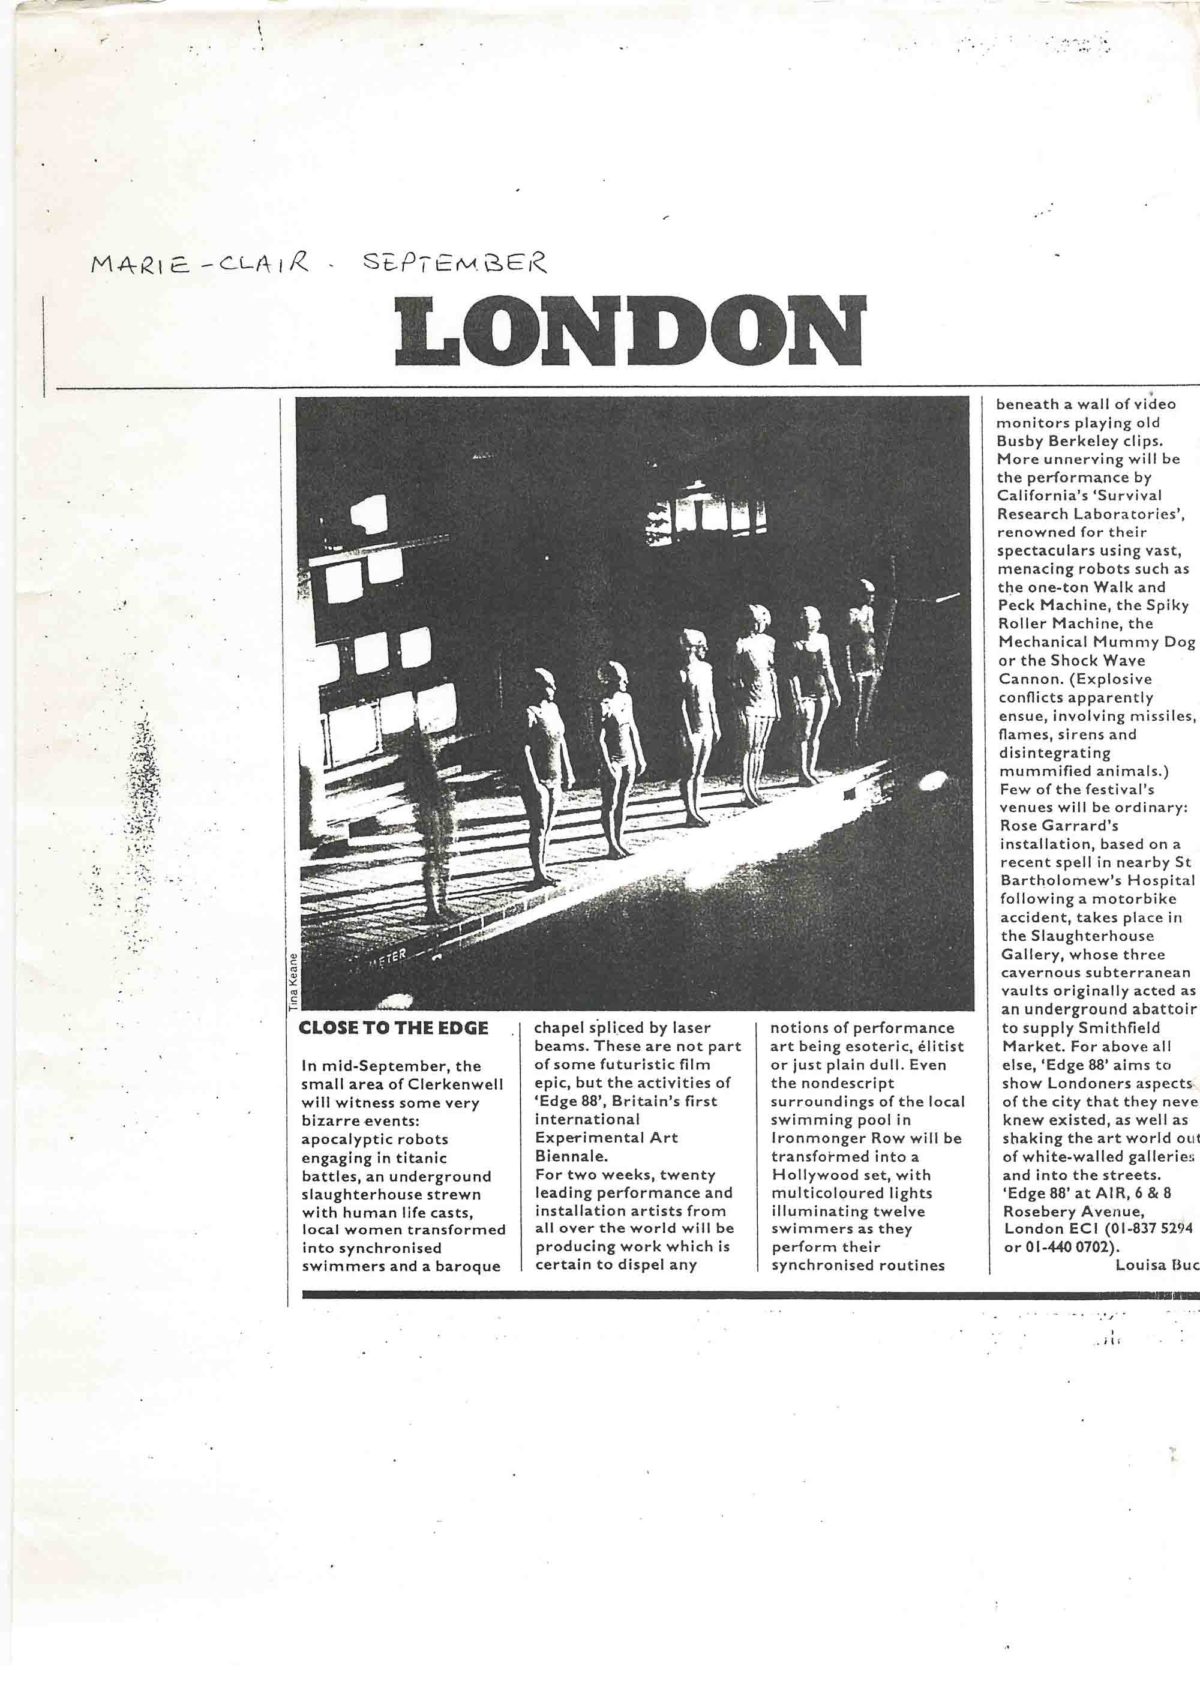 Article by Louisa Buck, Marie Clair, Sept 1988